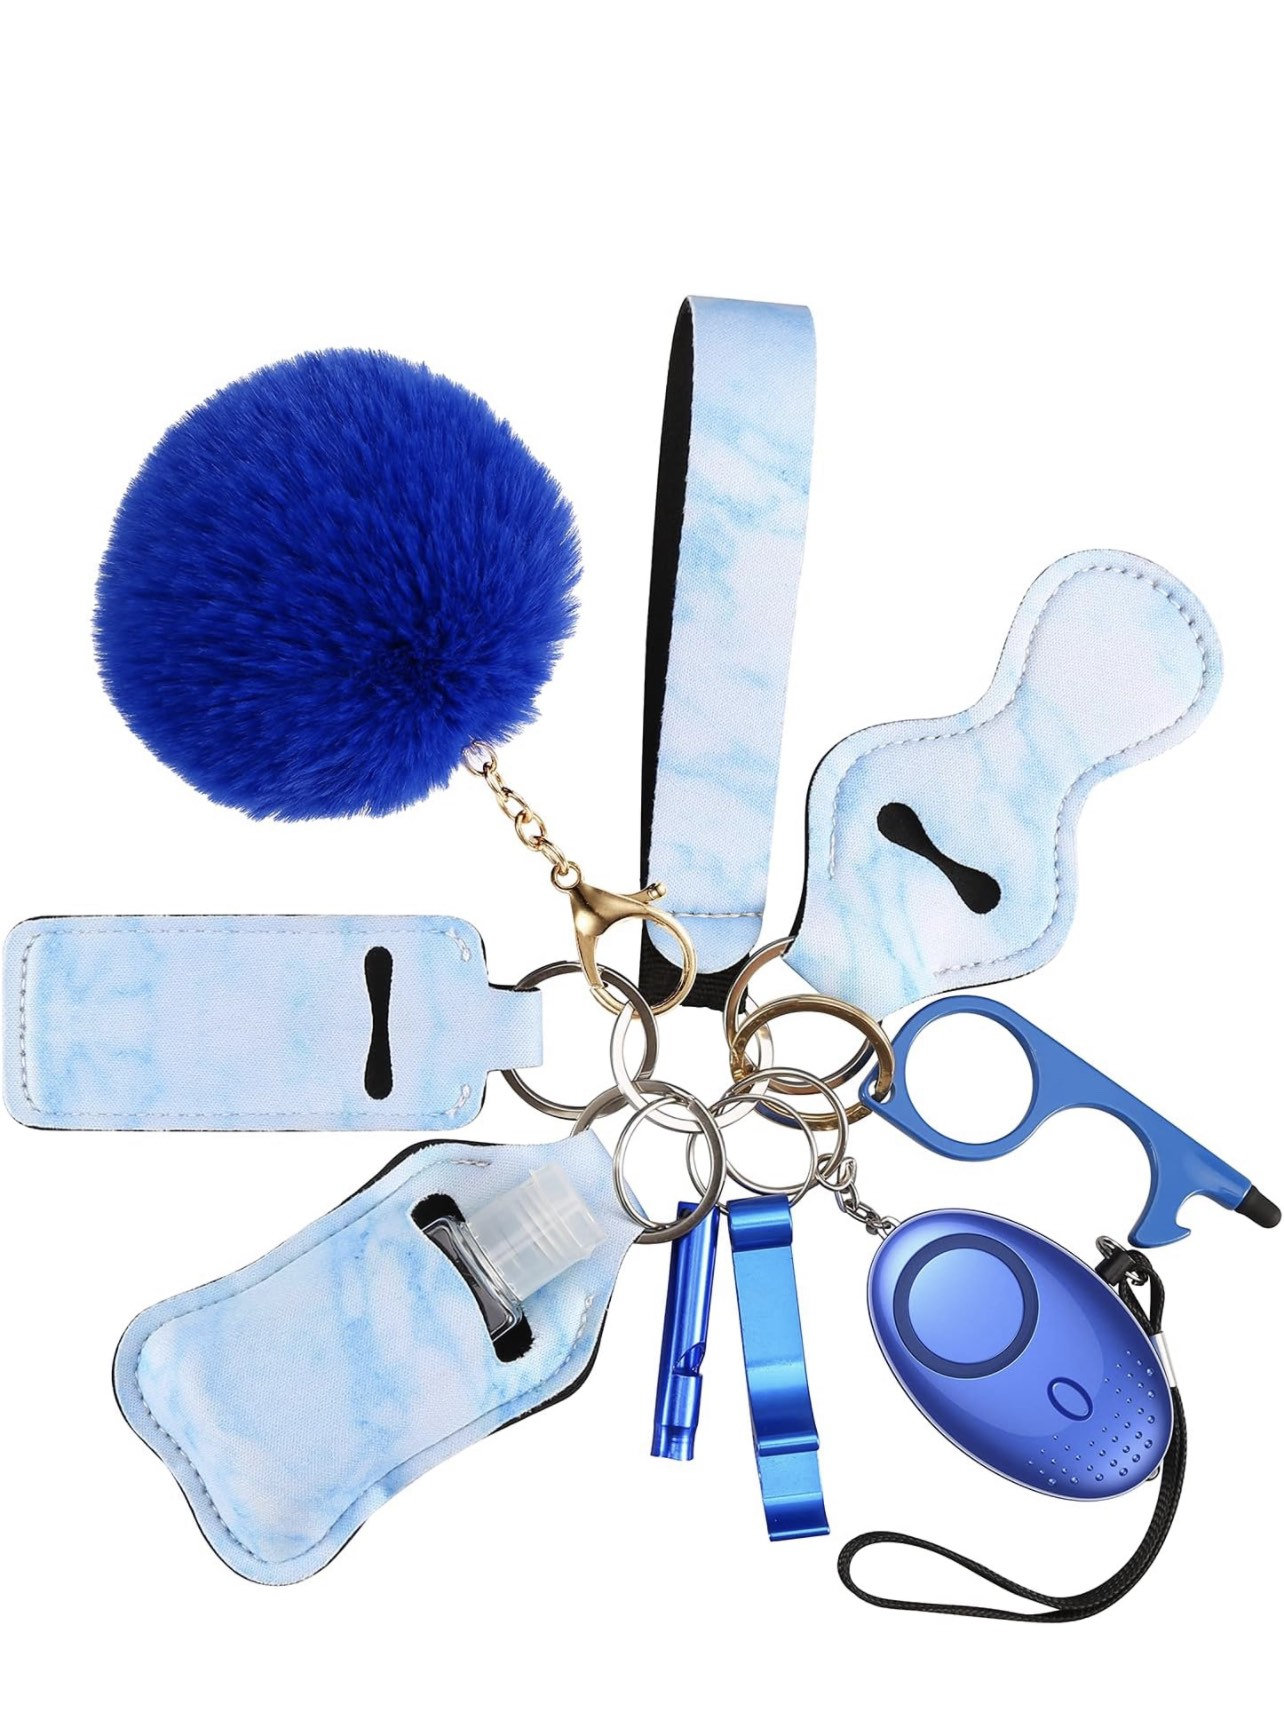 Buy Self Defense Kit Keychain Online In India -  India